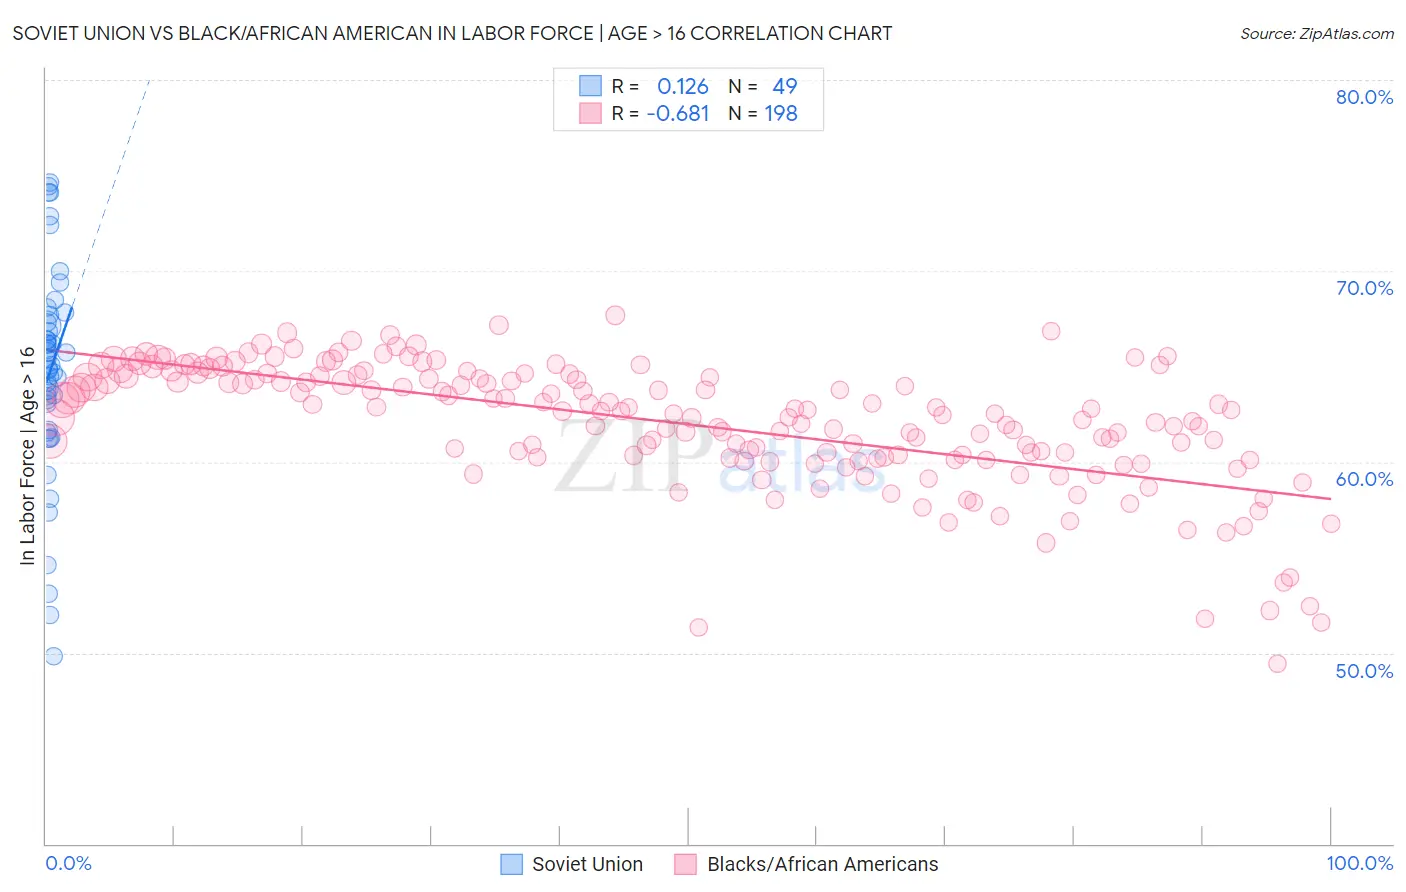 Soviet Union vs Black/African American In Labor Force | Age > 16